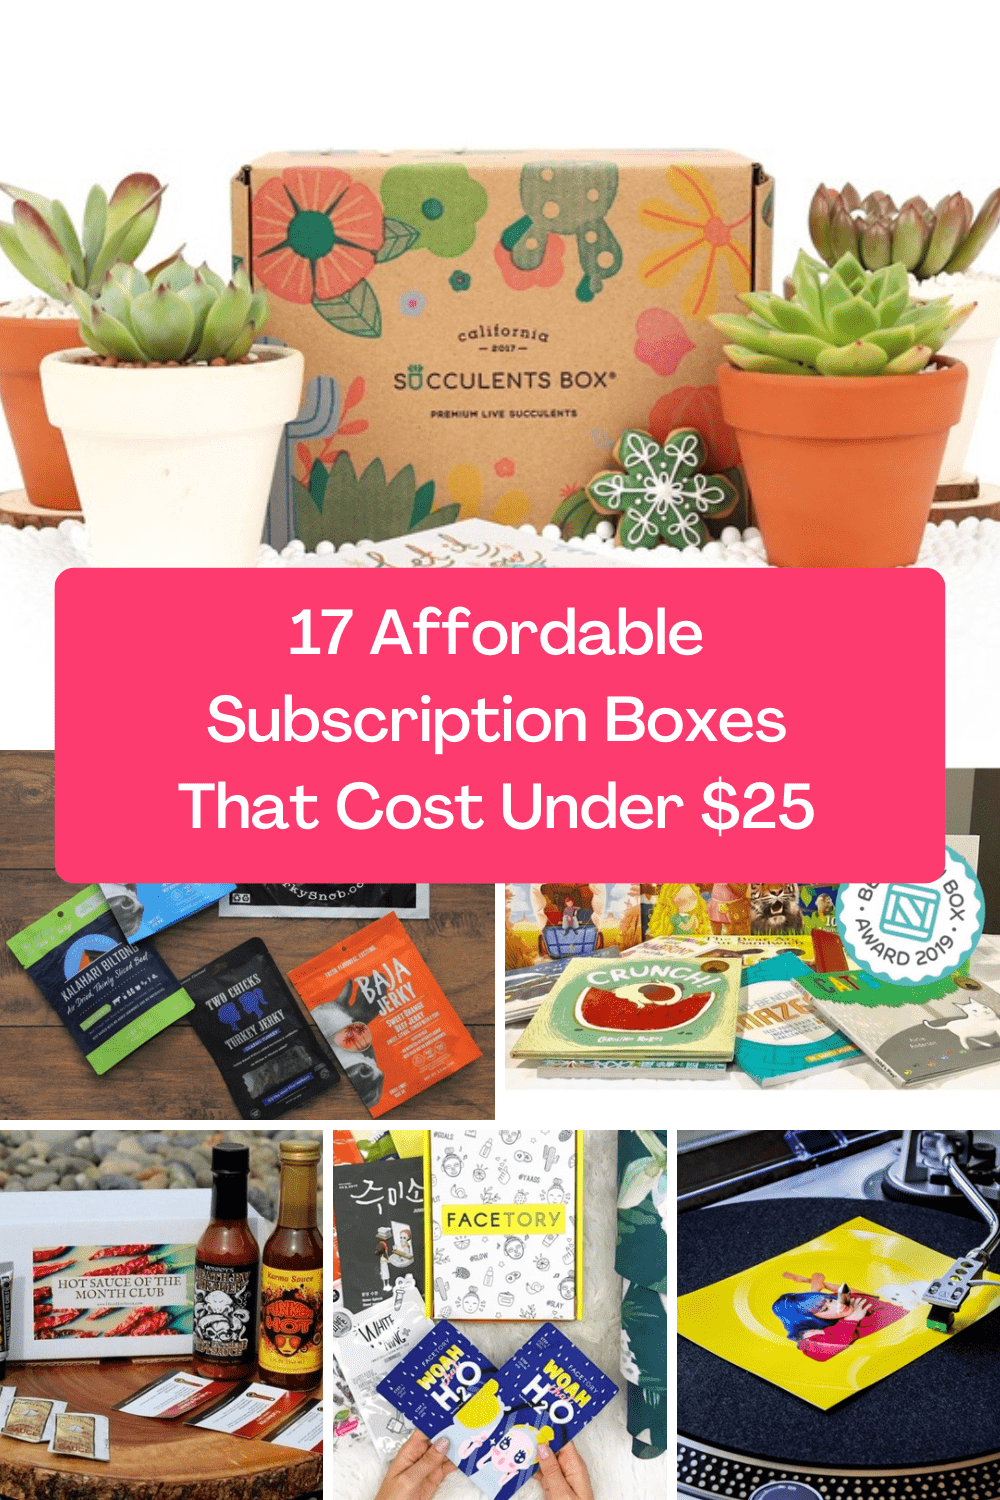 If you're looking for some great holiday gift ideas for hard-to-shop-for people on your list, these affordable subscription boxes are a great place to start!